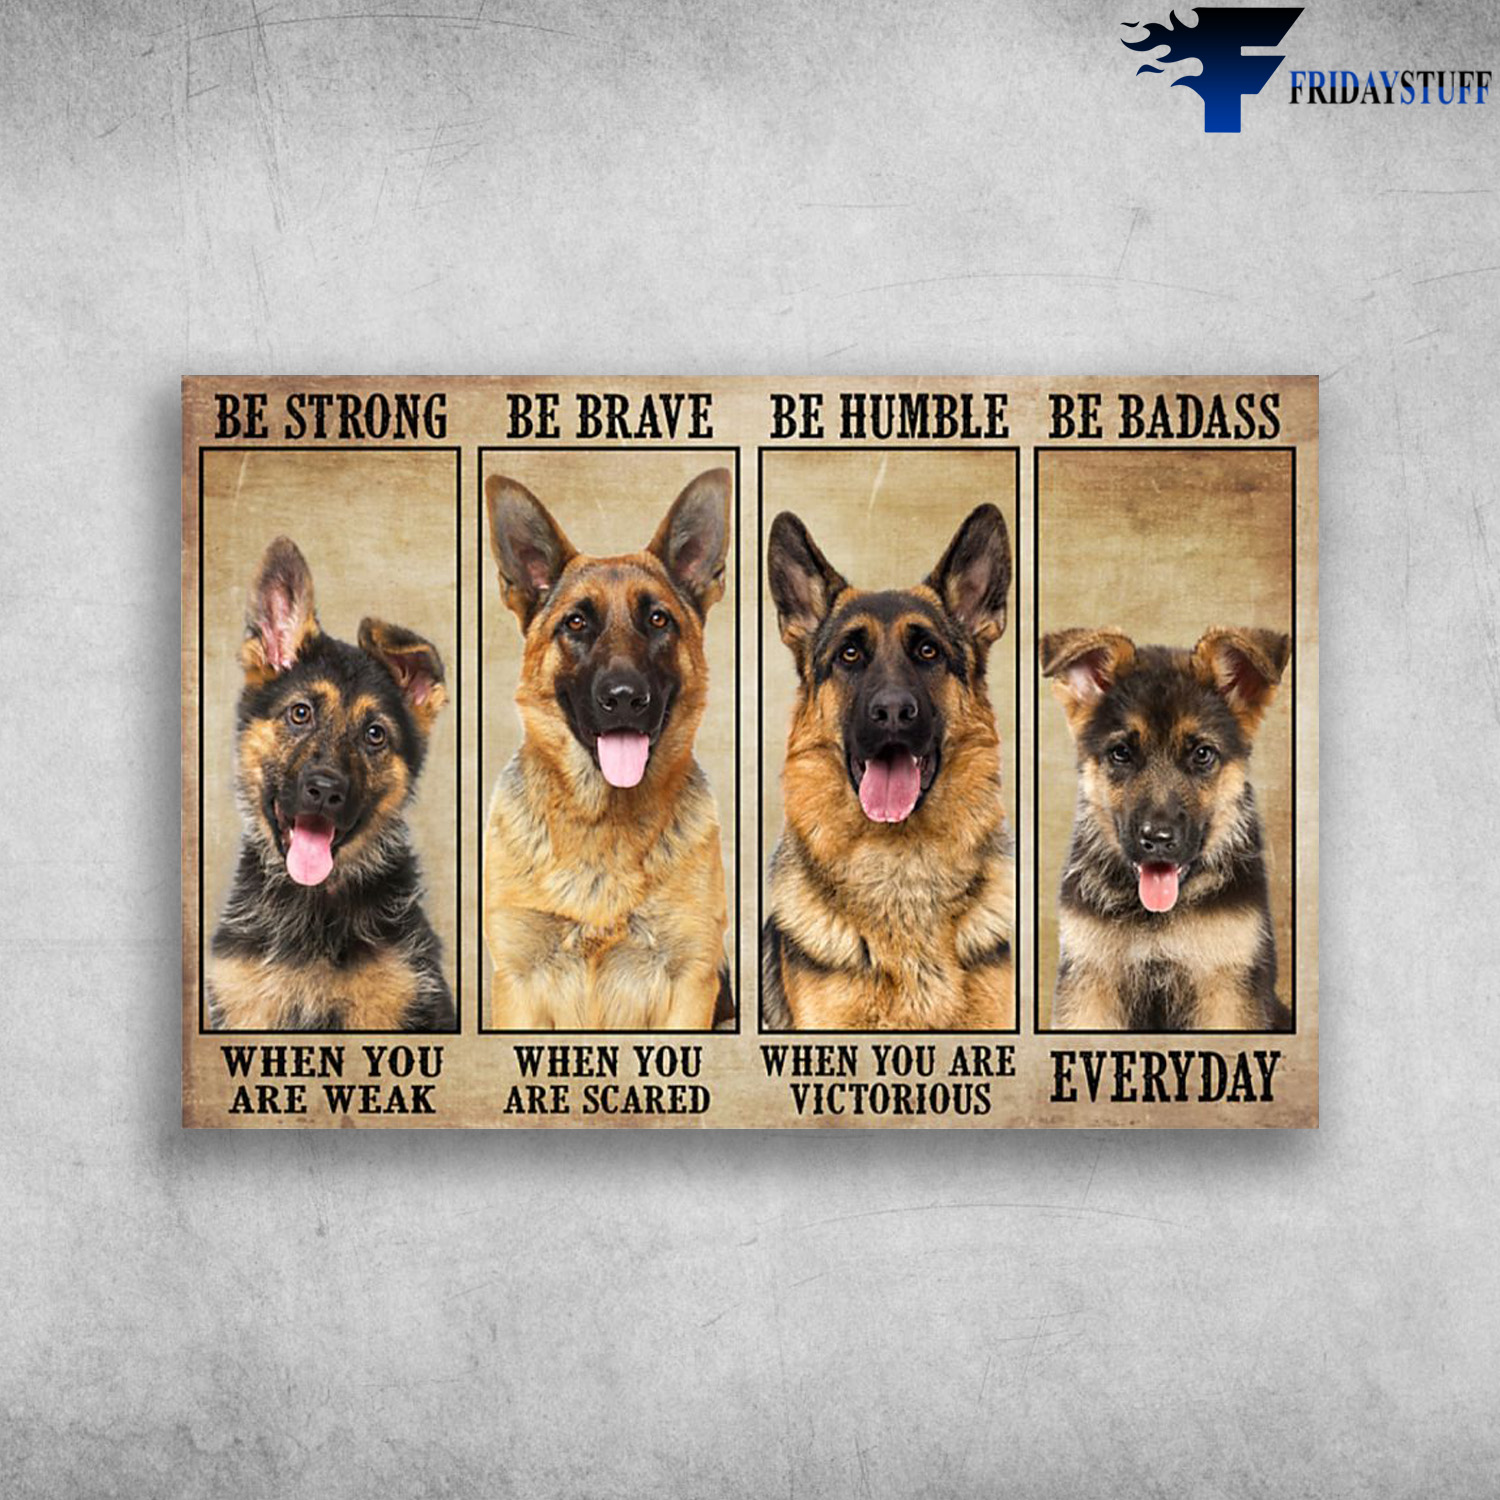 German Sherpherd Dog - Be Strong When You Are Weak, Be Brave When You Are Scared, Be Humble When You Are Victorious, Be Badass Everyday